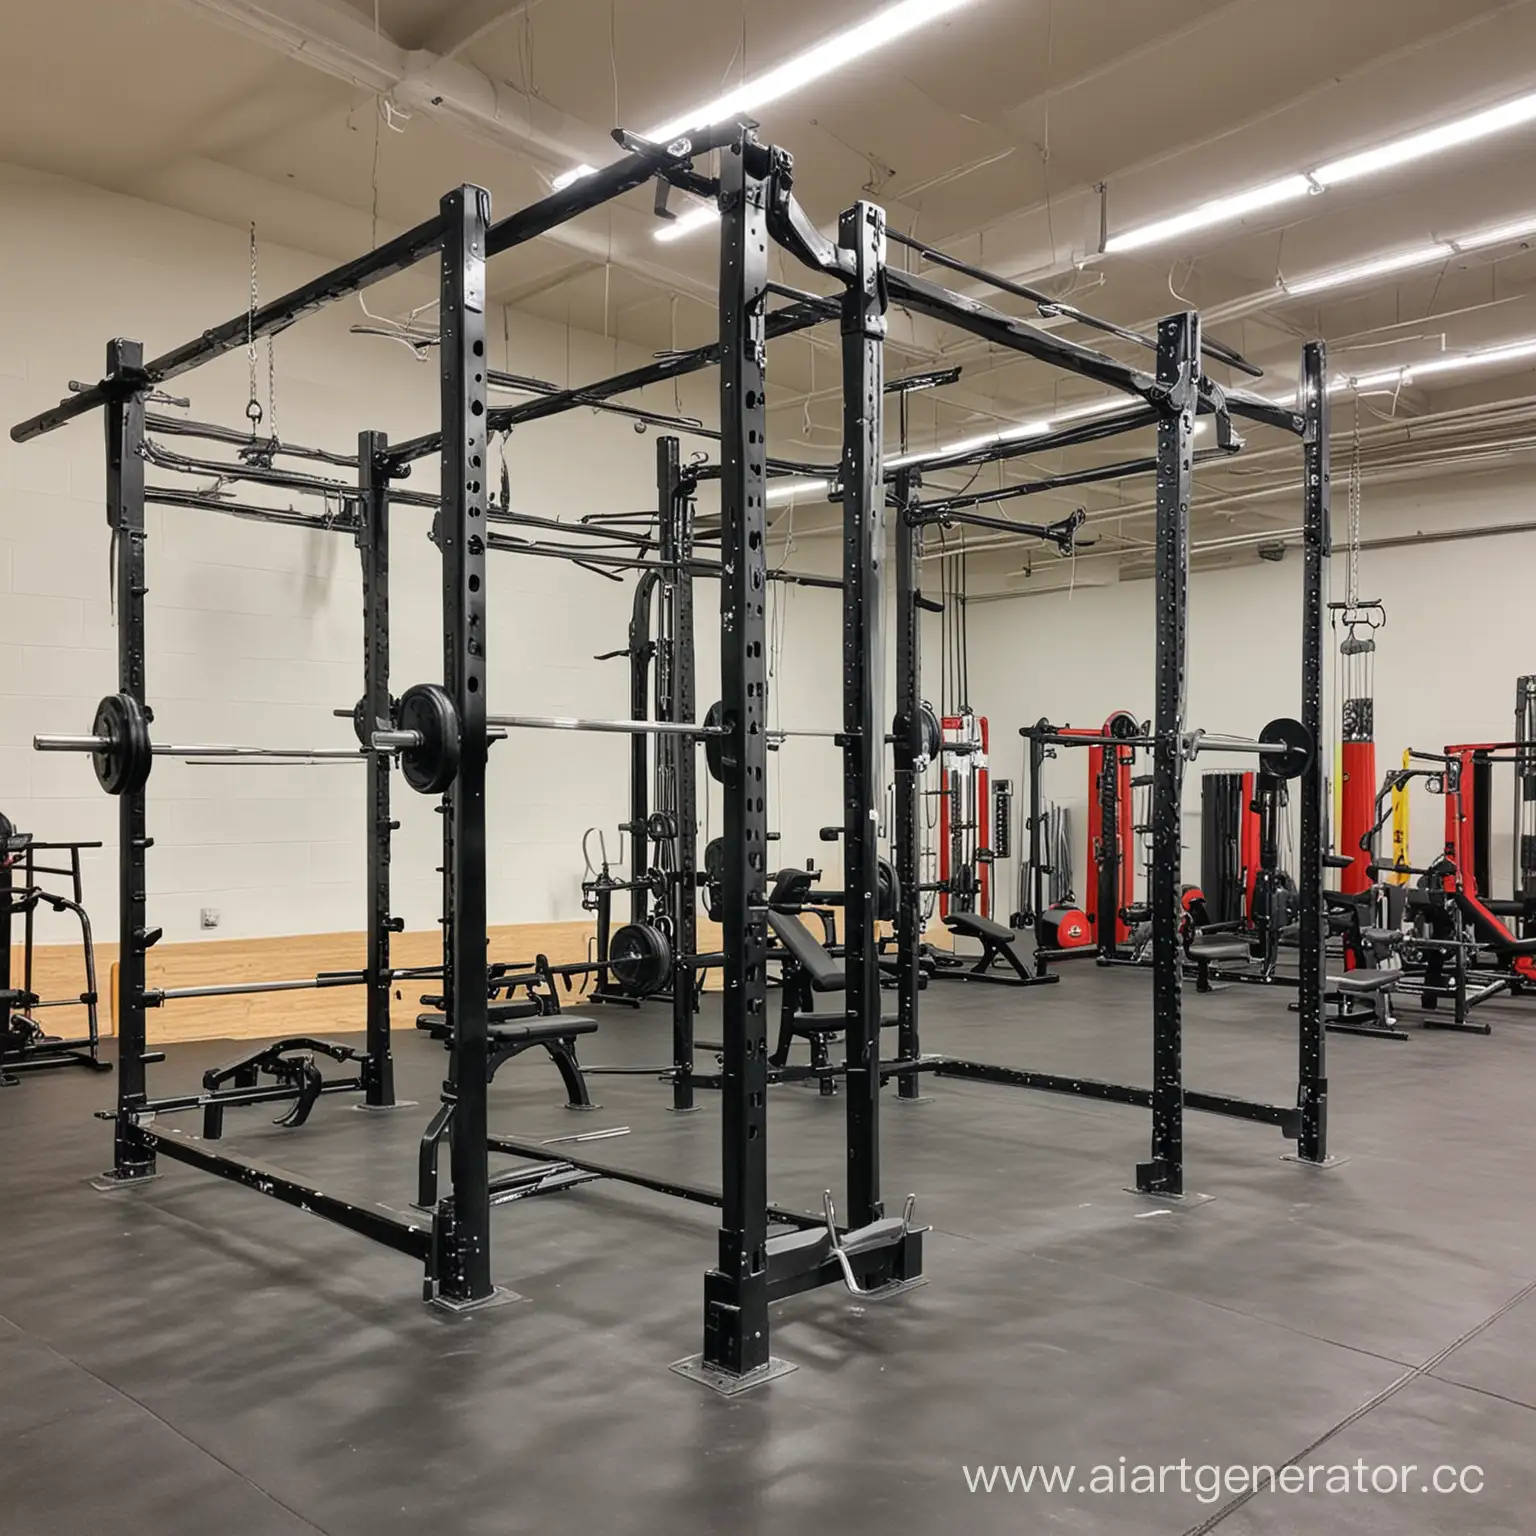 Indoor-Gym-with-Bars-and-Athletic-Equipment